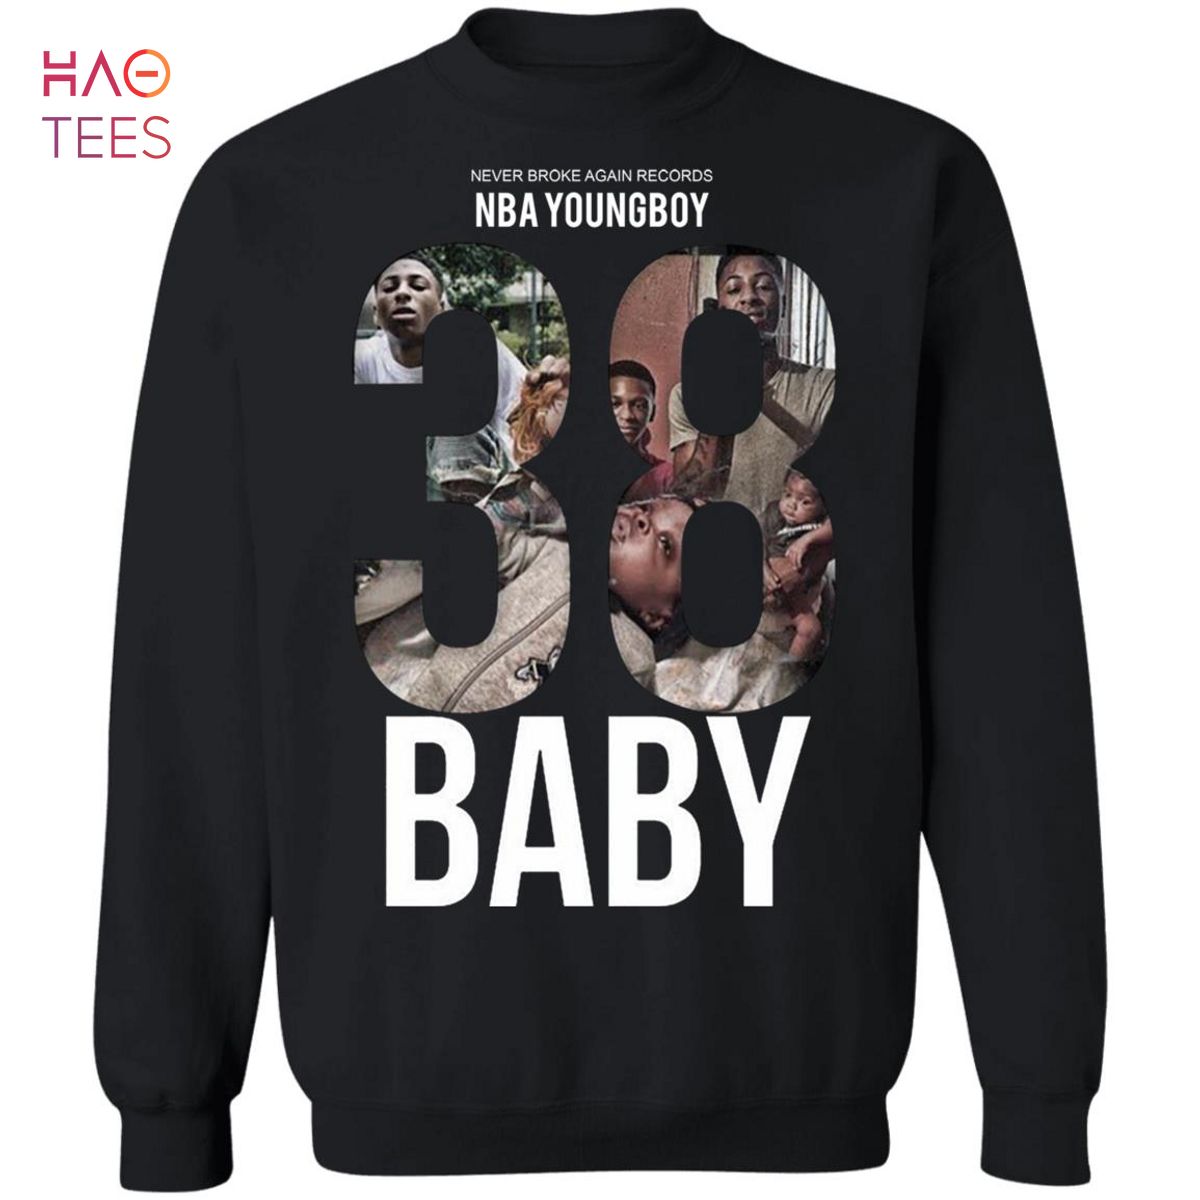 BEST 38 Baby Sweater NBA Youngboy